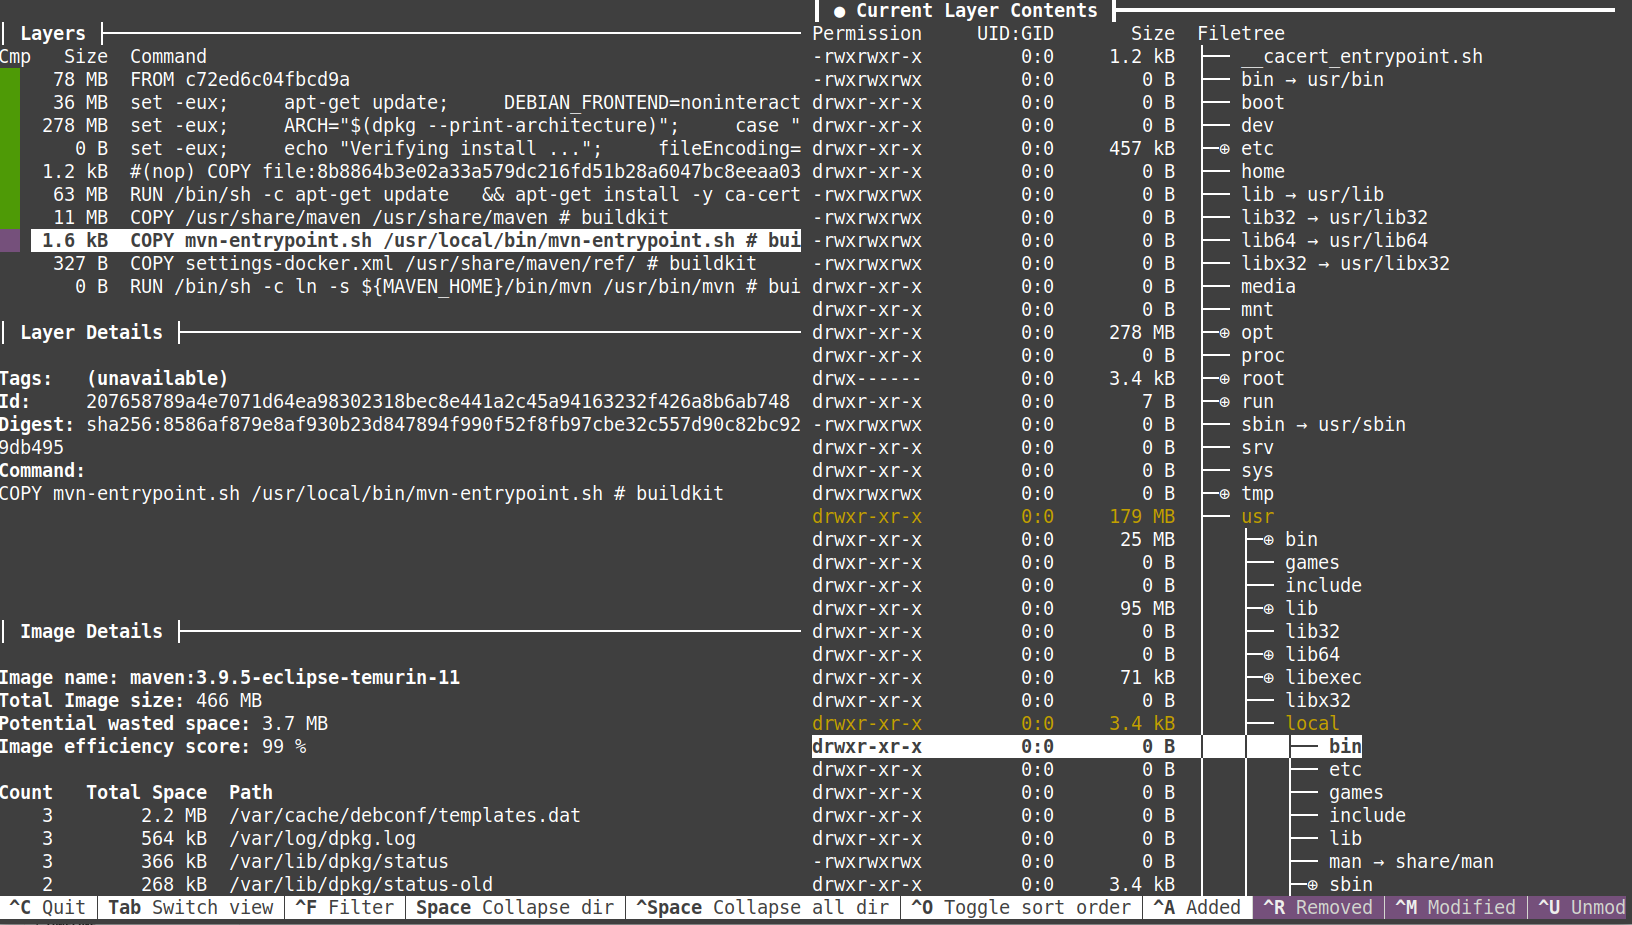 Console output of the dive for the analysis of a docker image.